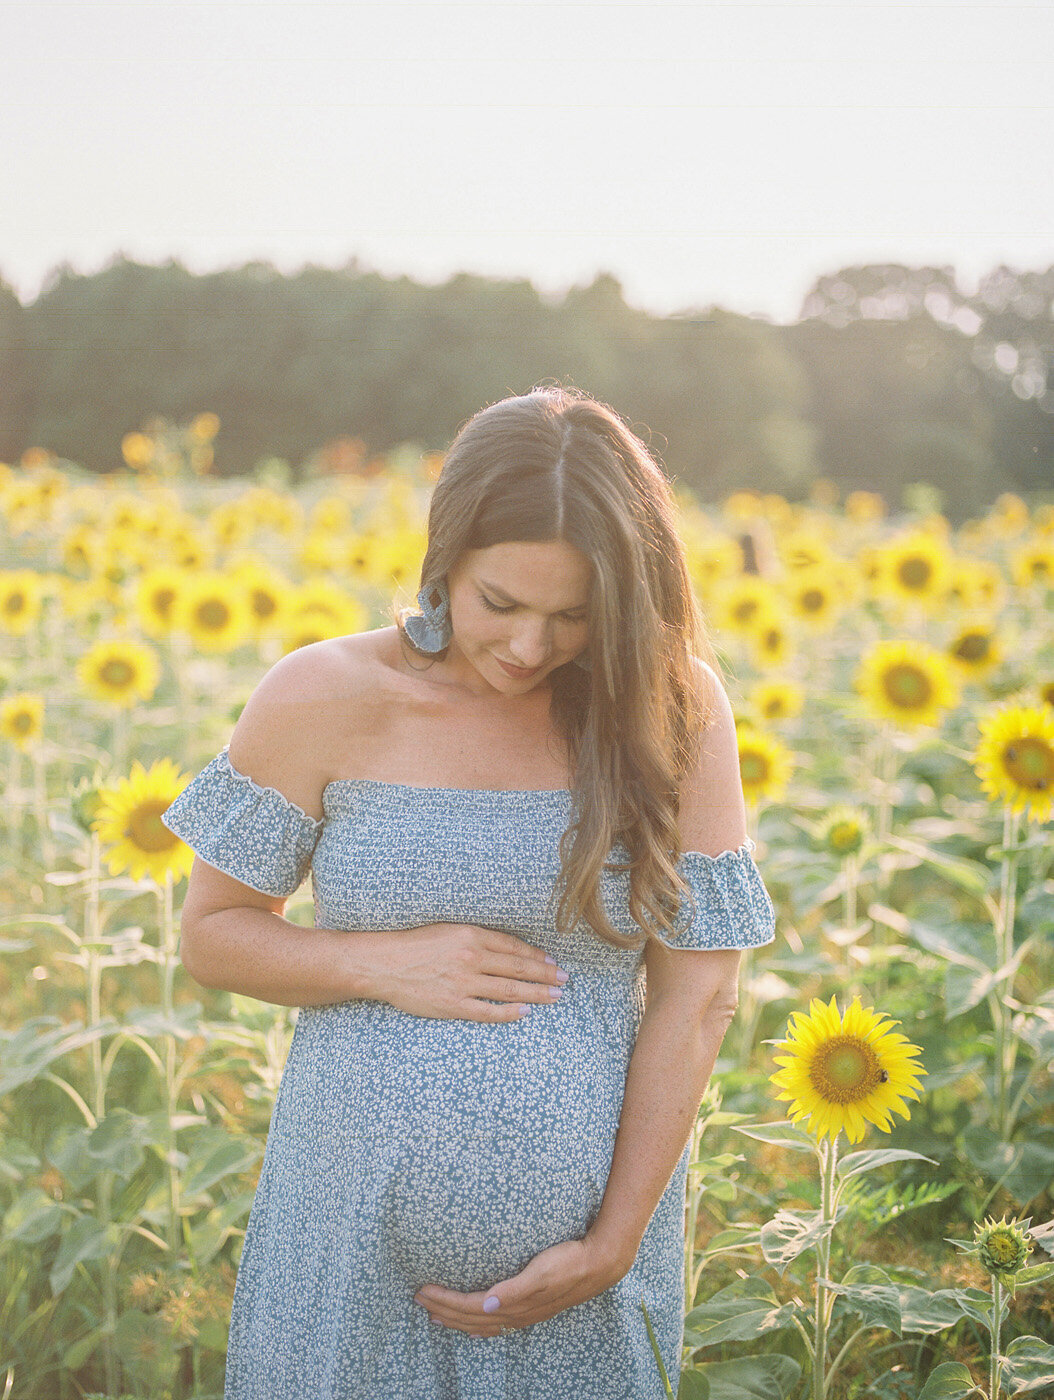 Raleigh Maternity Photographer | Jessica Agee Photography - 009